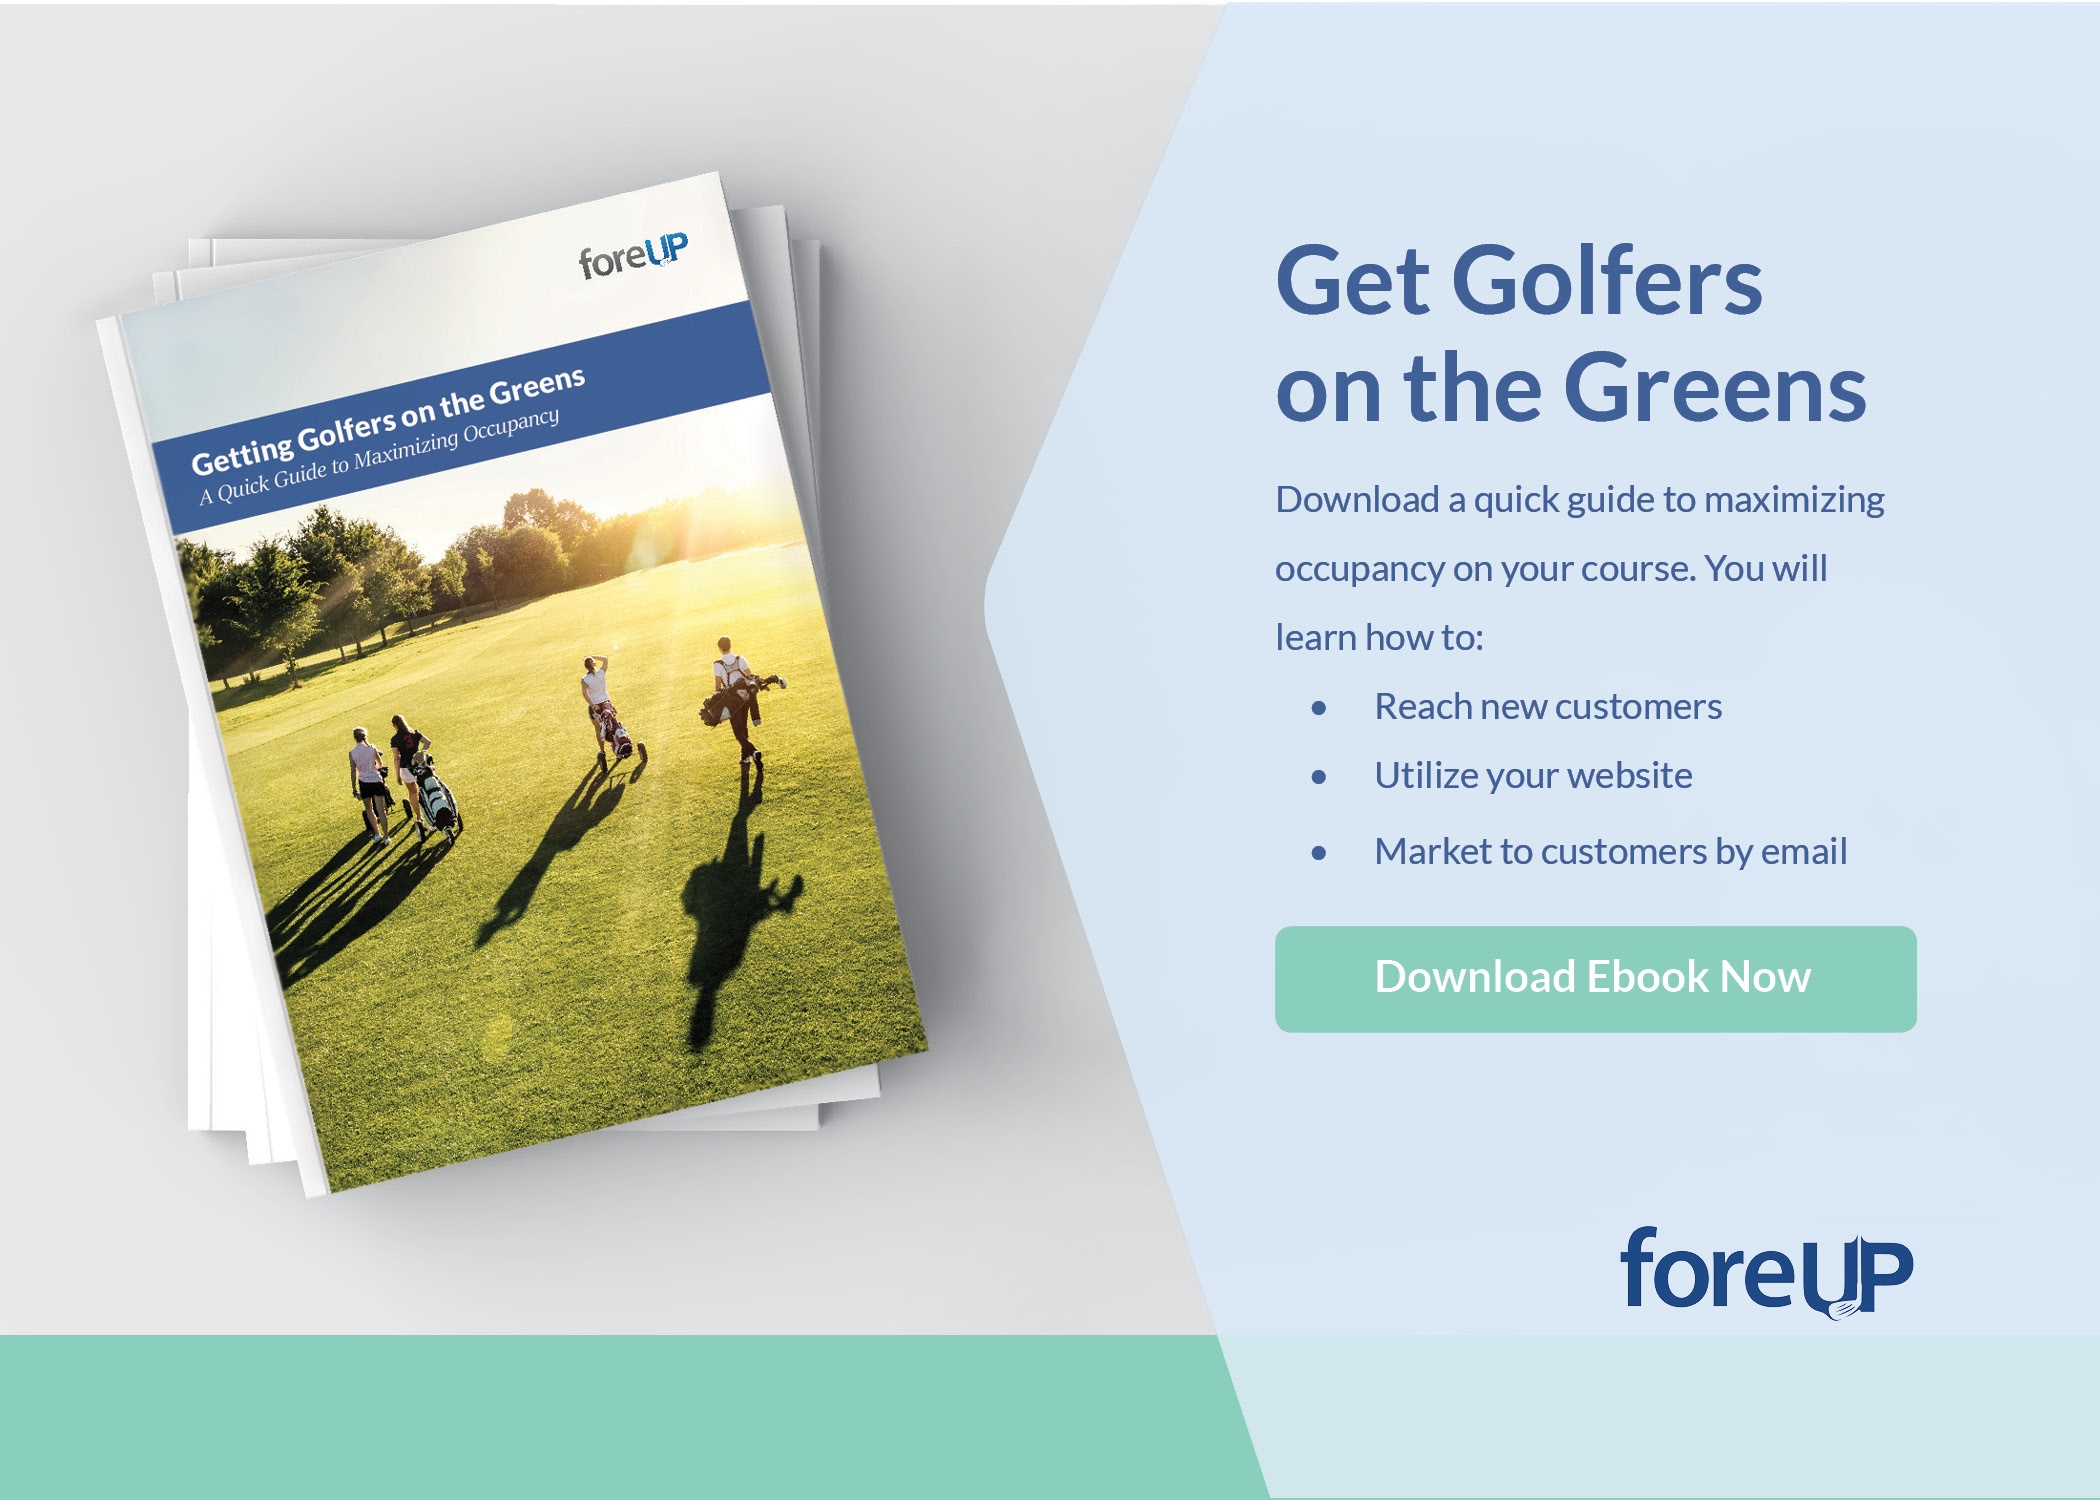 Get Golfers on the Greens Ebook